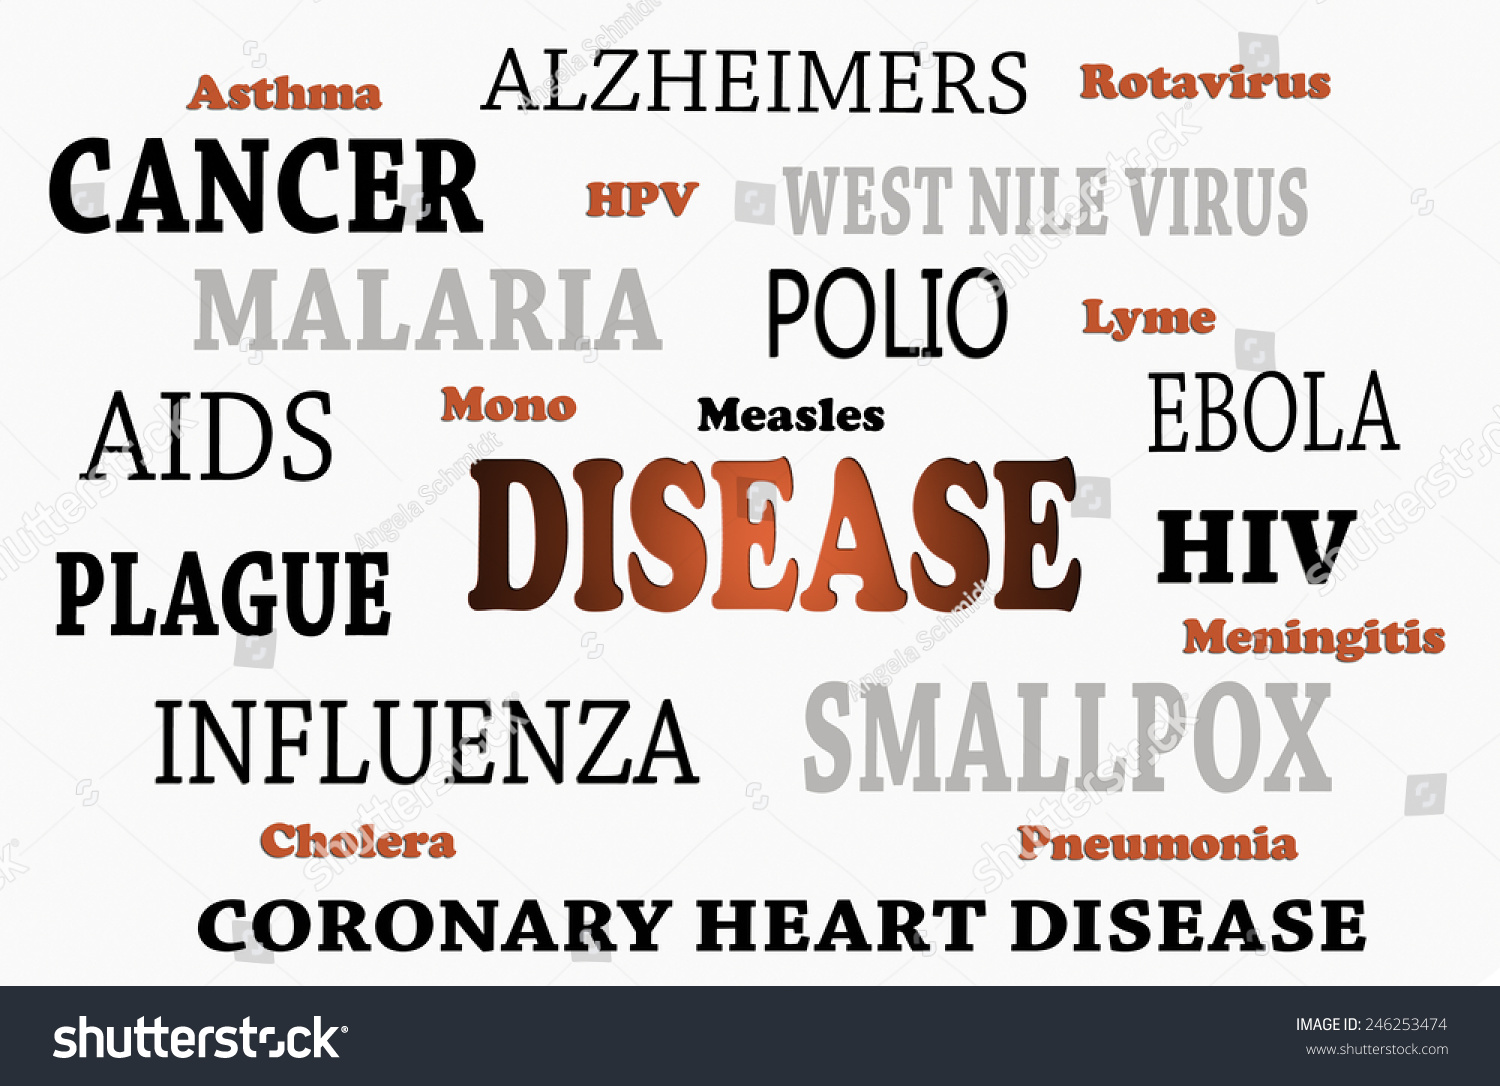 Where can you find lists of various human diseases?